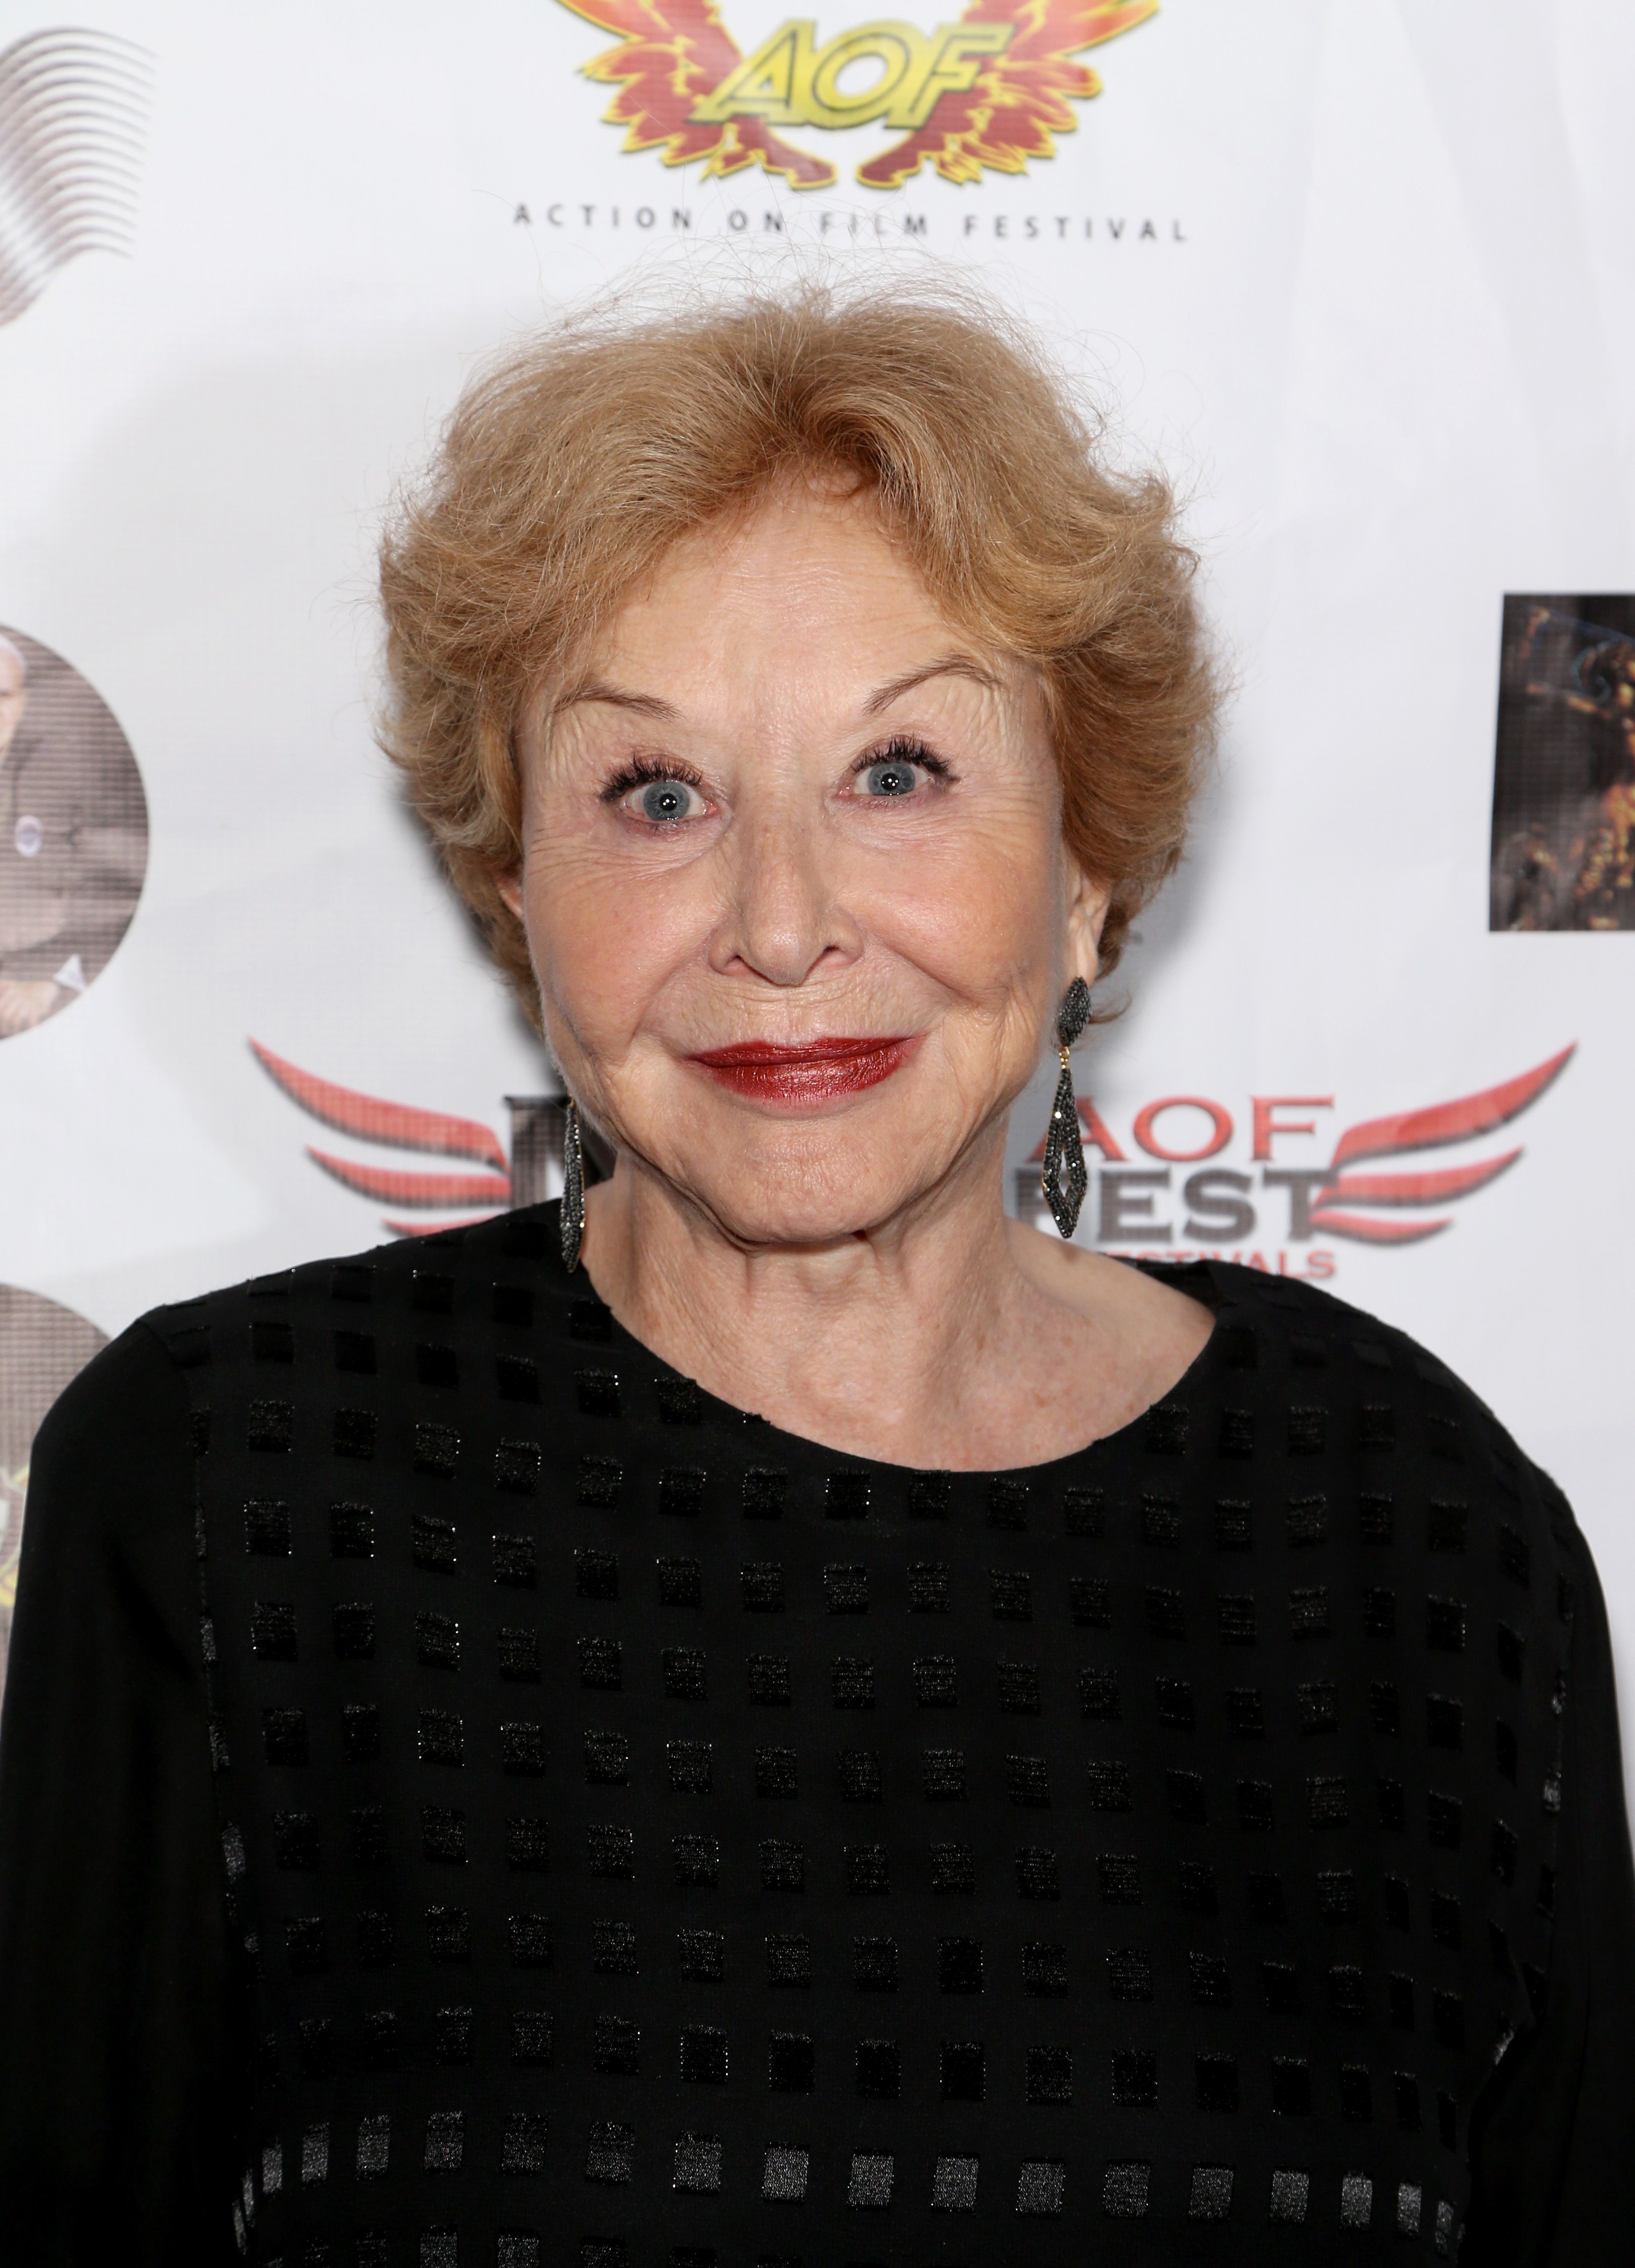 Michael Learned during the Action on Film MEGAFest International Film Festival at the Rio Hotel & Casino on August 3, 2019 in Las Vegas, Nevada. | Source: Getty Images